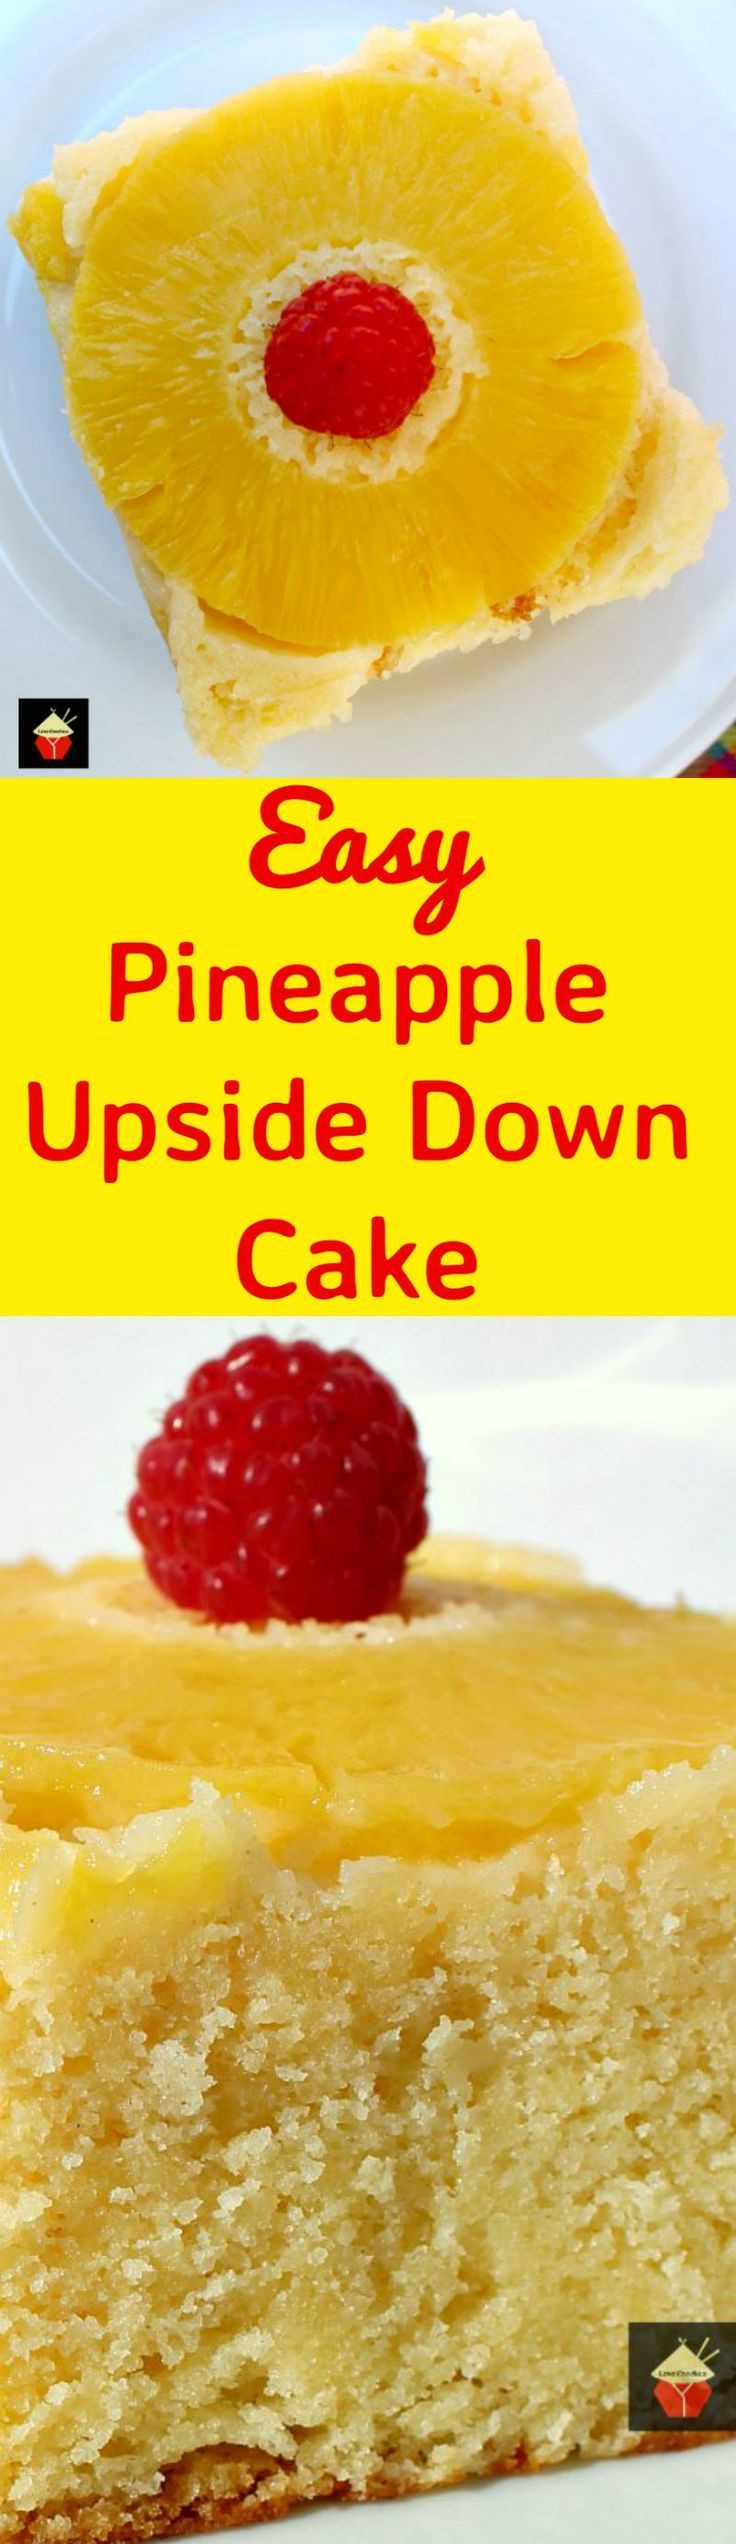 Pineapple Upside Down Cake From Scratch
 Lovely Pineapple Upside Down Cake From Scratch Ideas